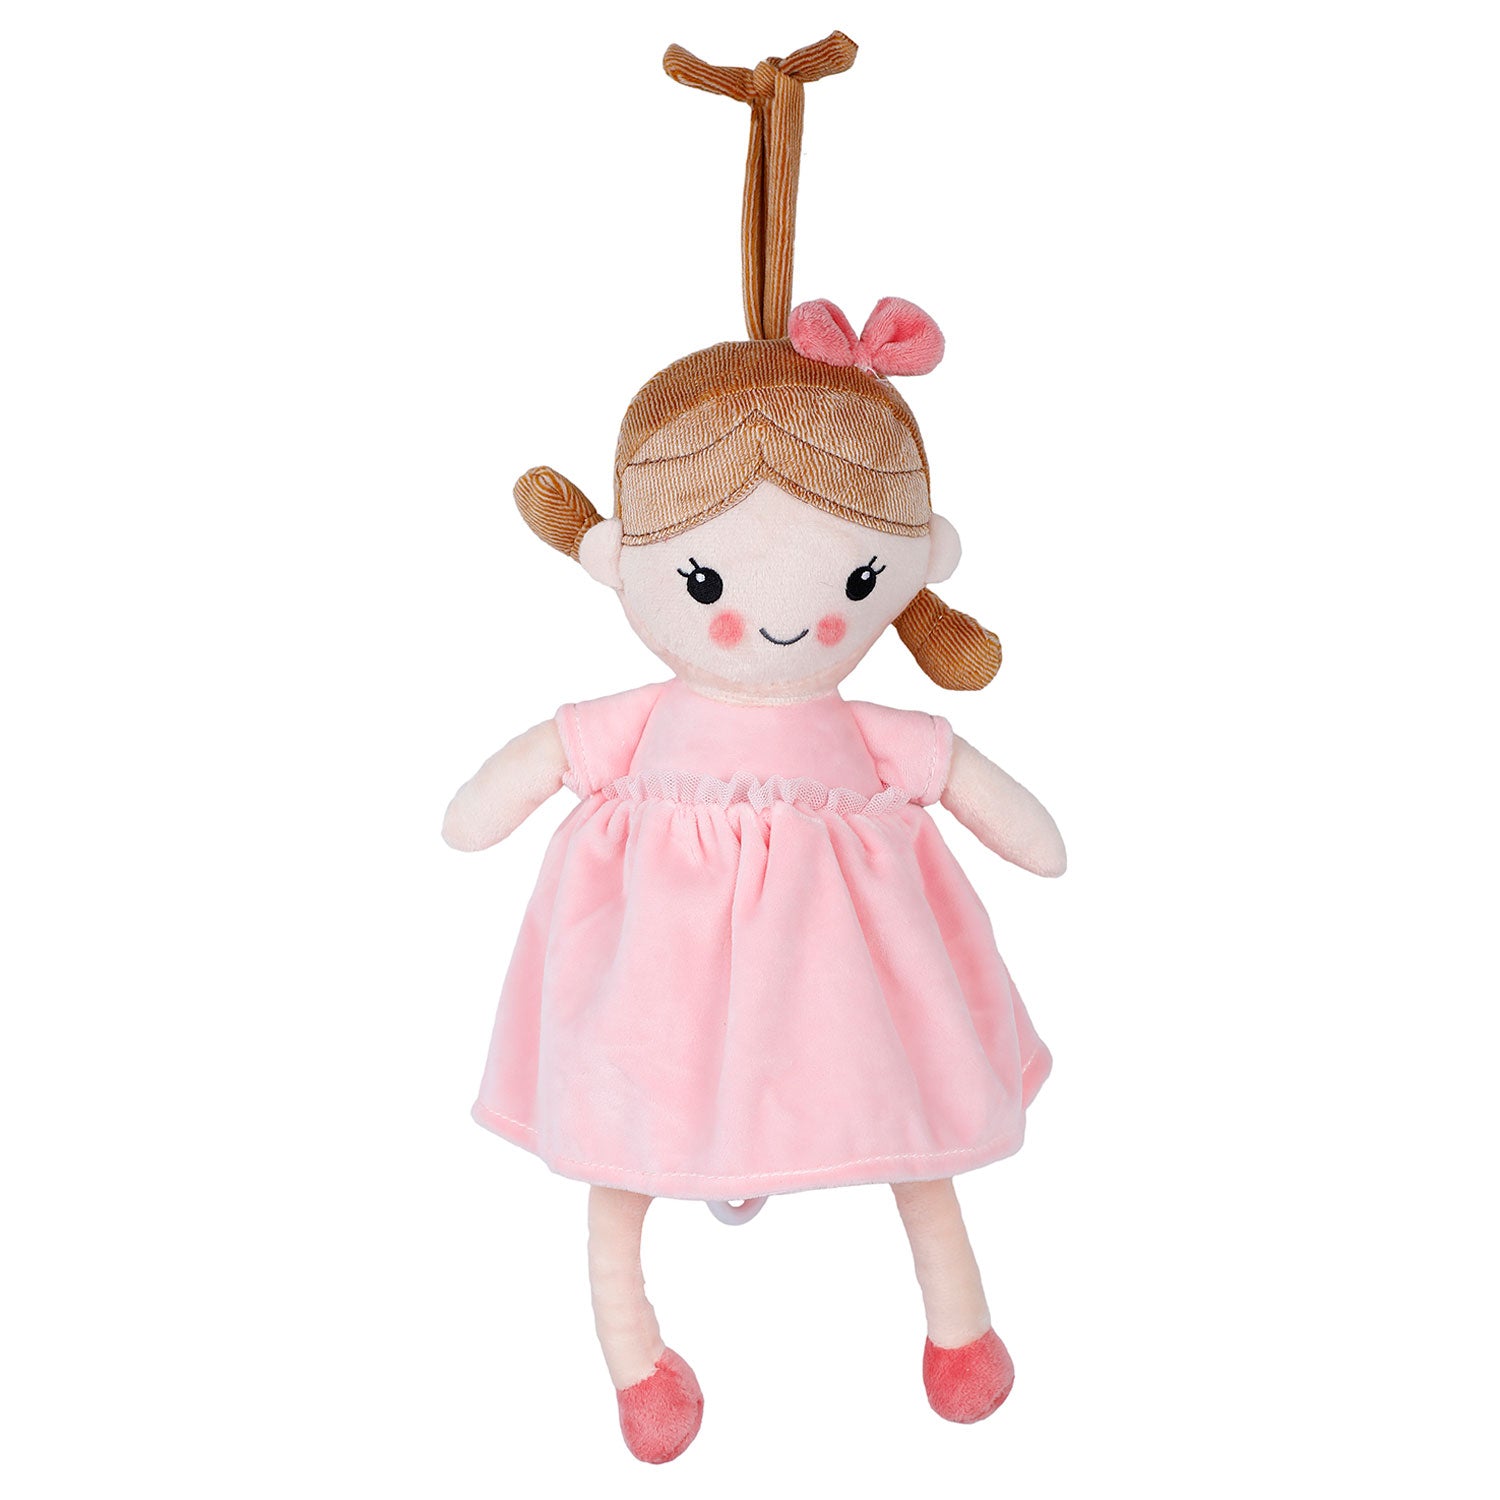 Baby Moo Chubby Doll Hanging Musical Pulling Toy Doll - Pink